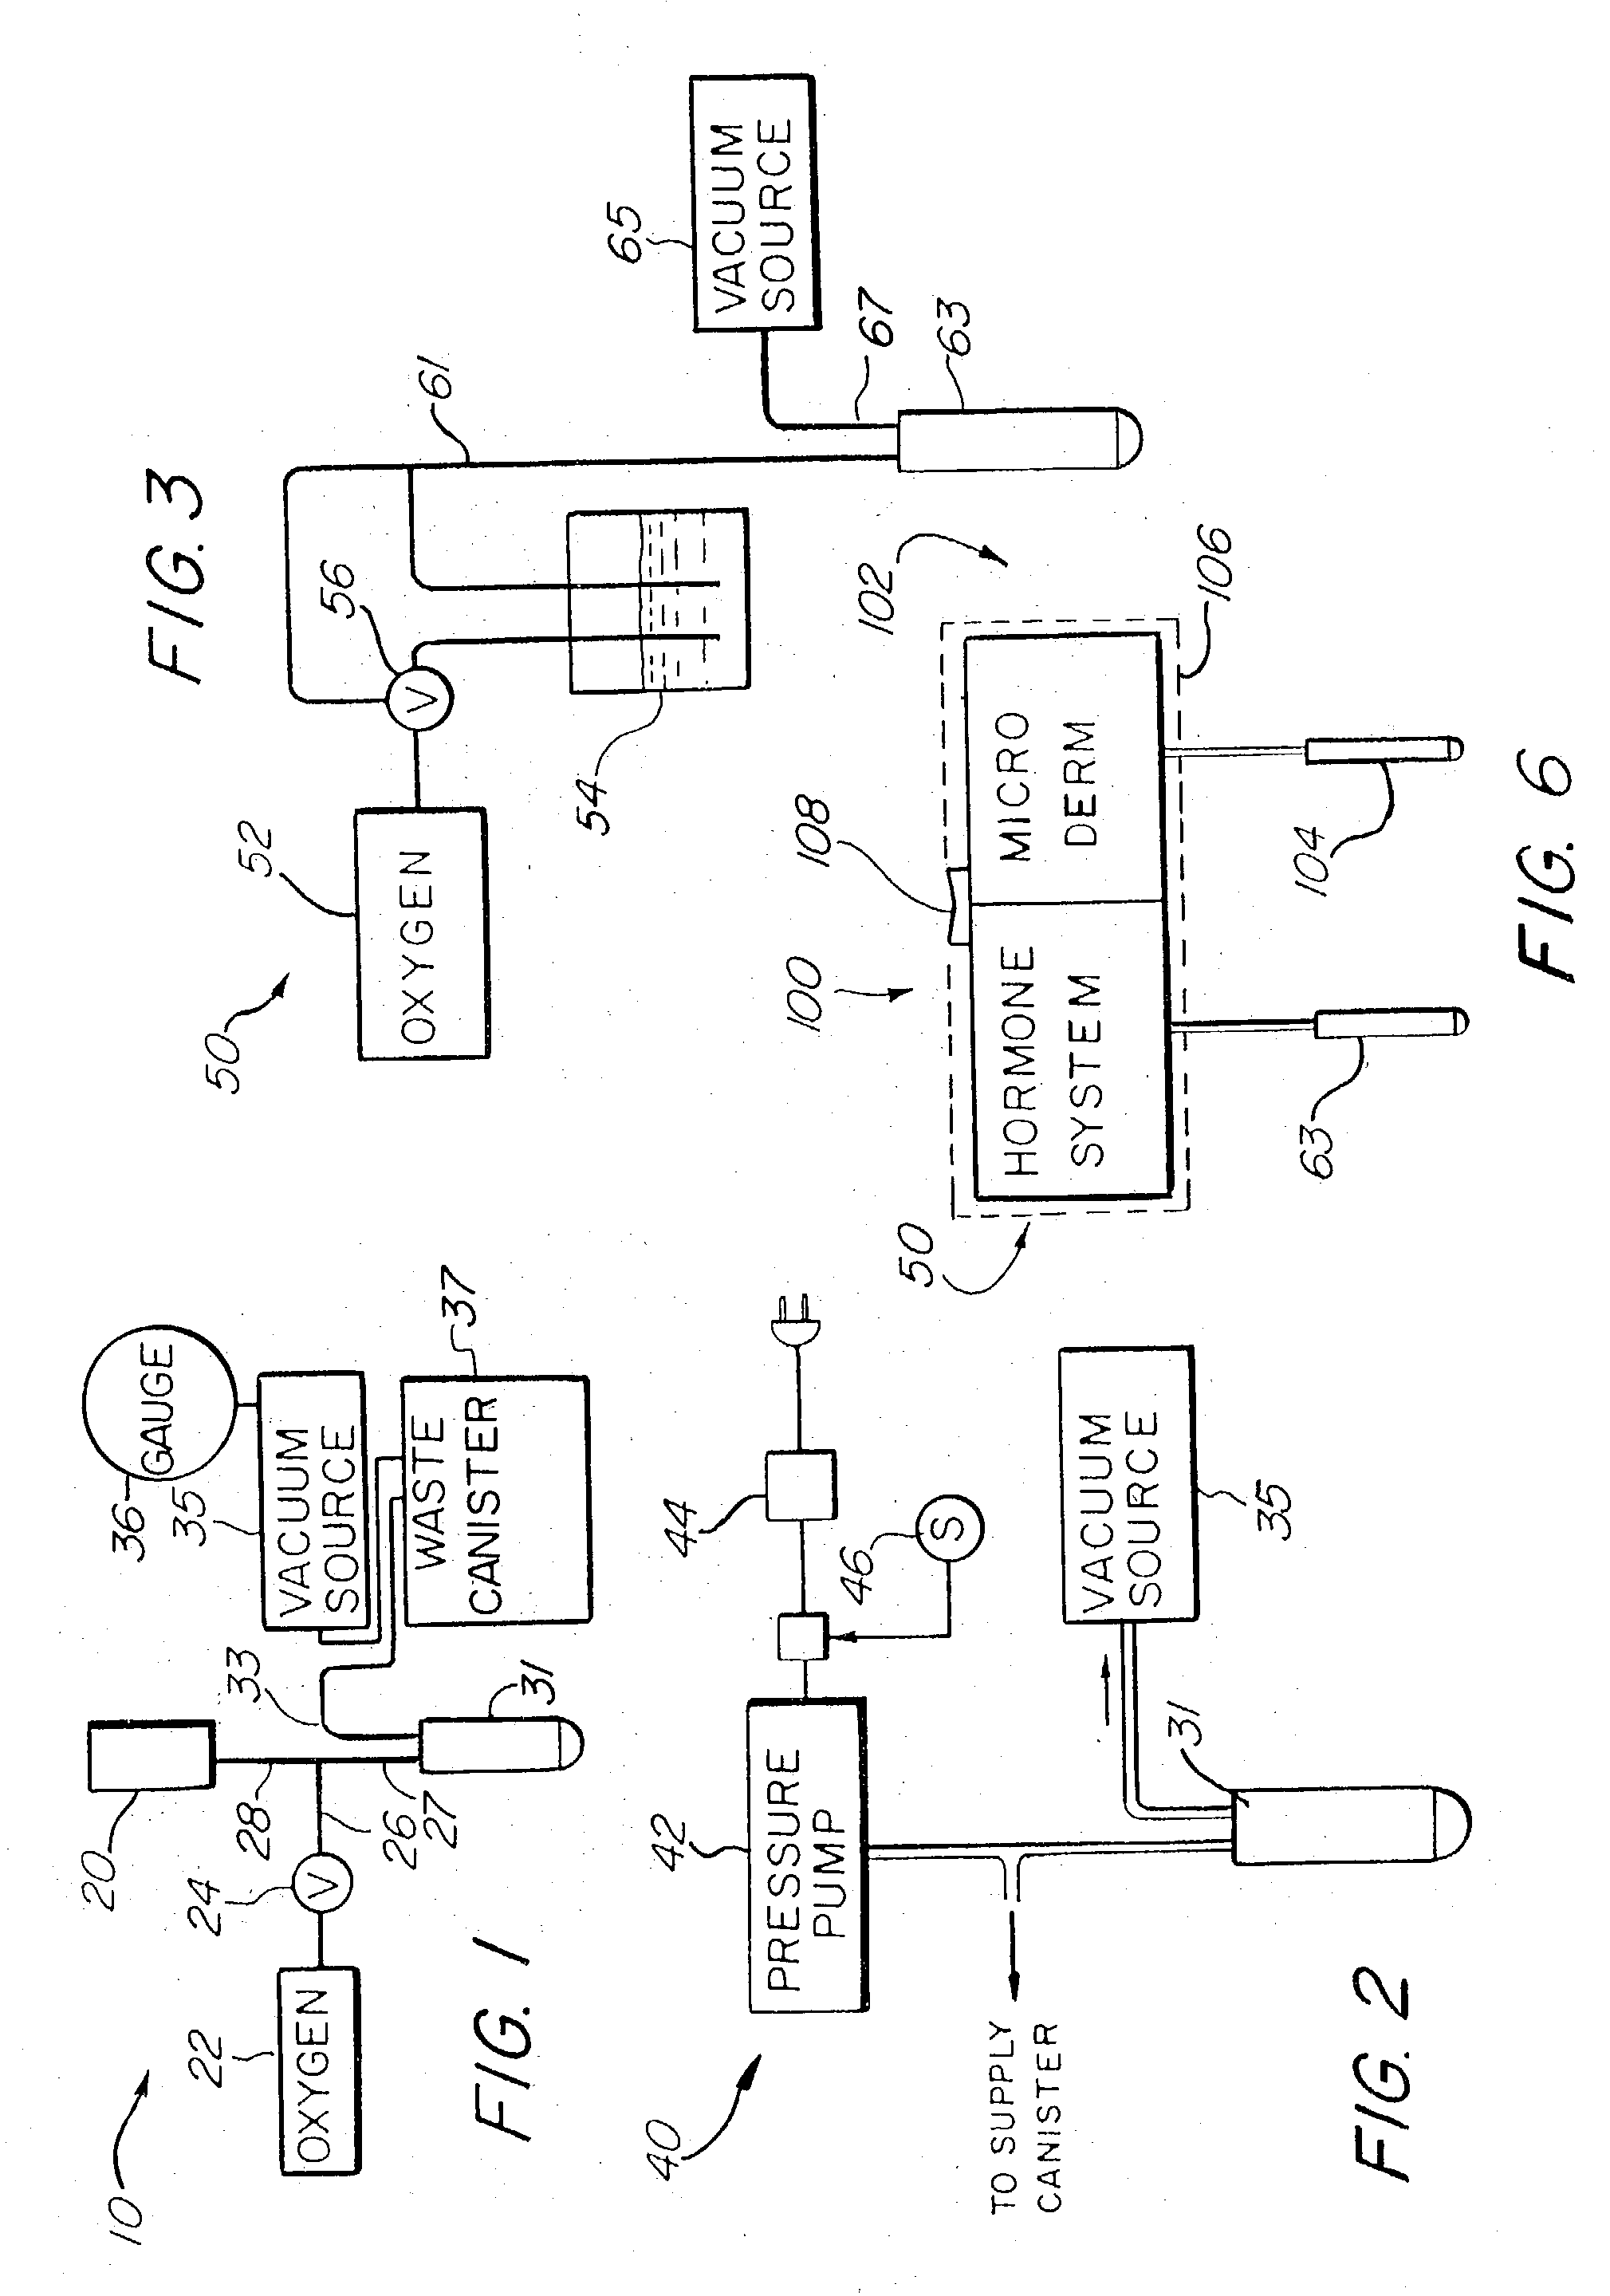 Skin abrasion growth factor fluid delivery system and method